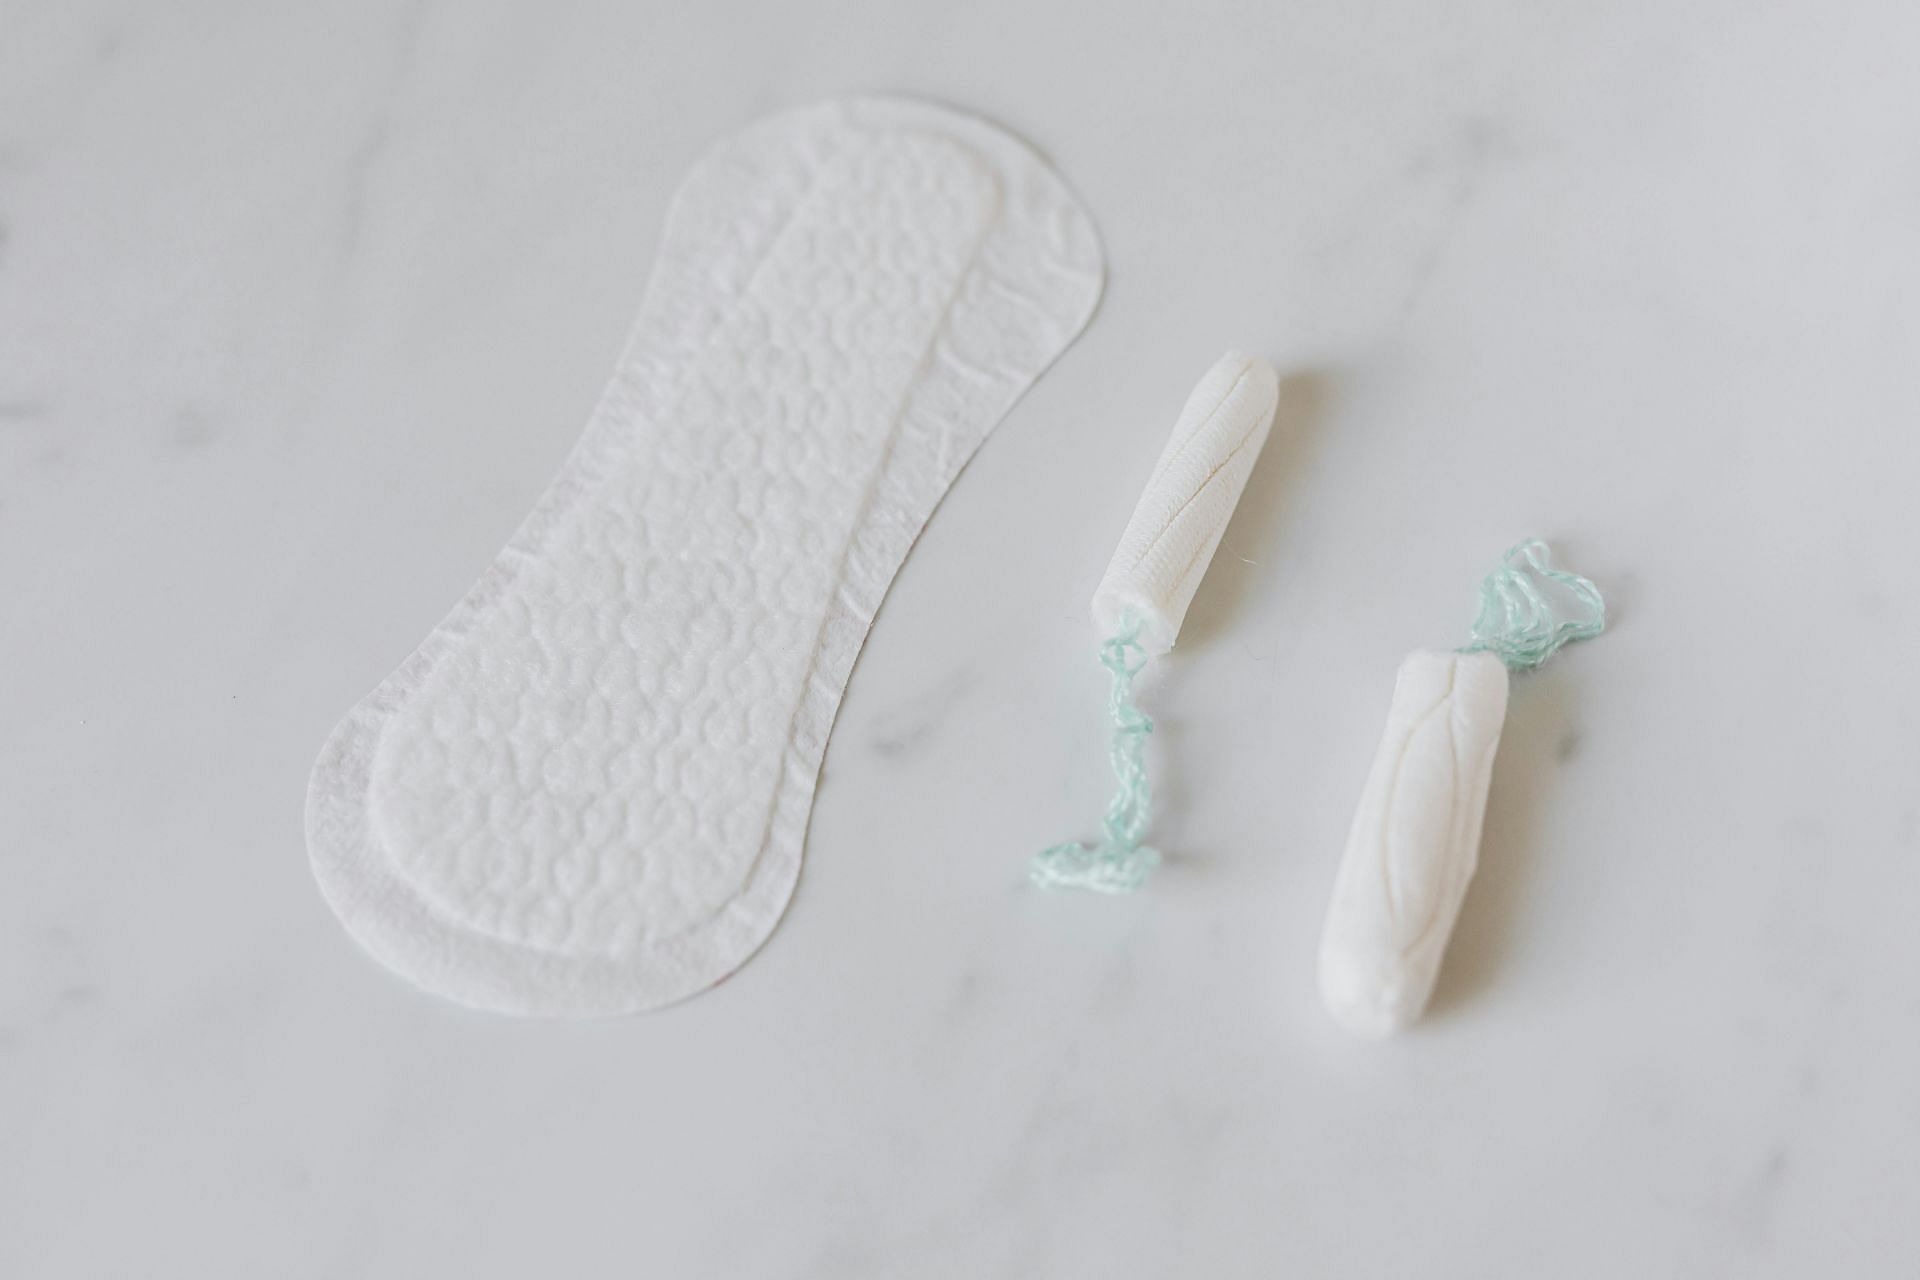 How to delay your period (image sourced via Pexels / Photo by karolina)